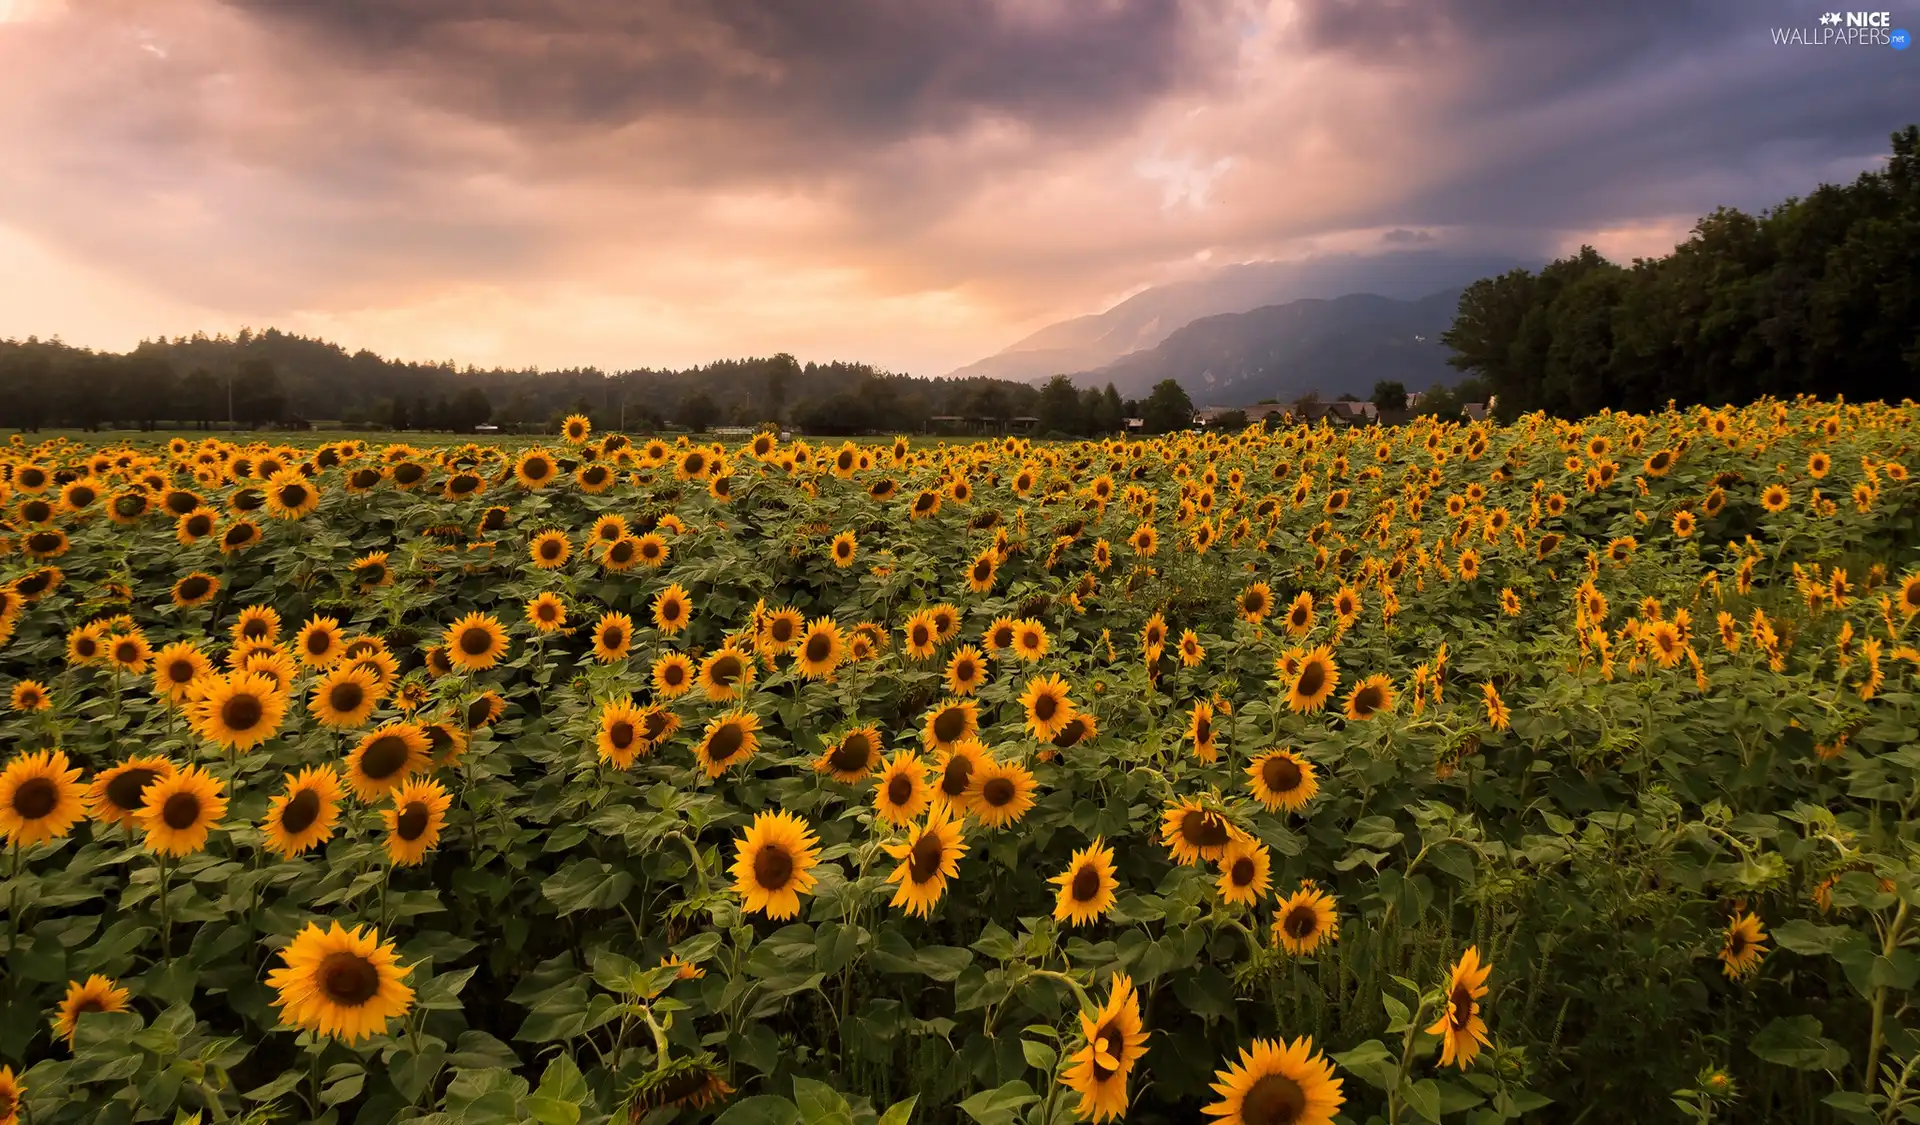 viewes, clouds, plantation, trees, Nice sunflowers